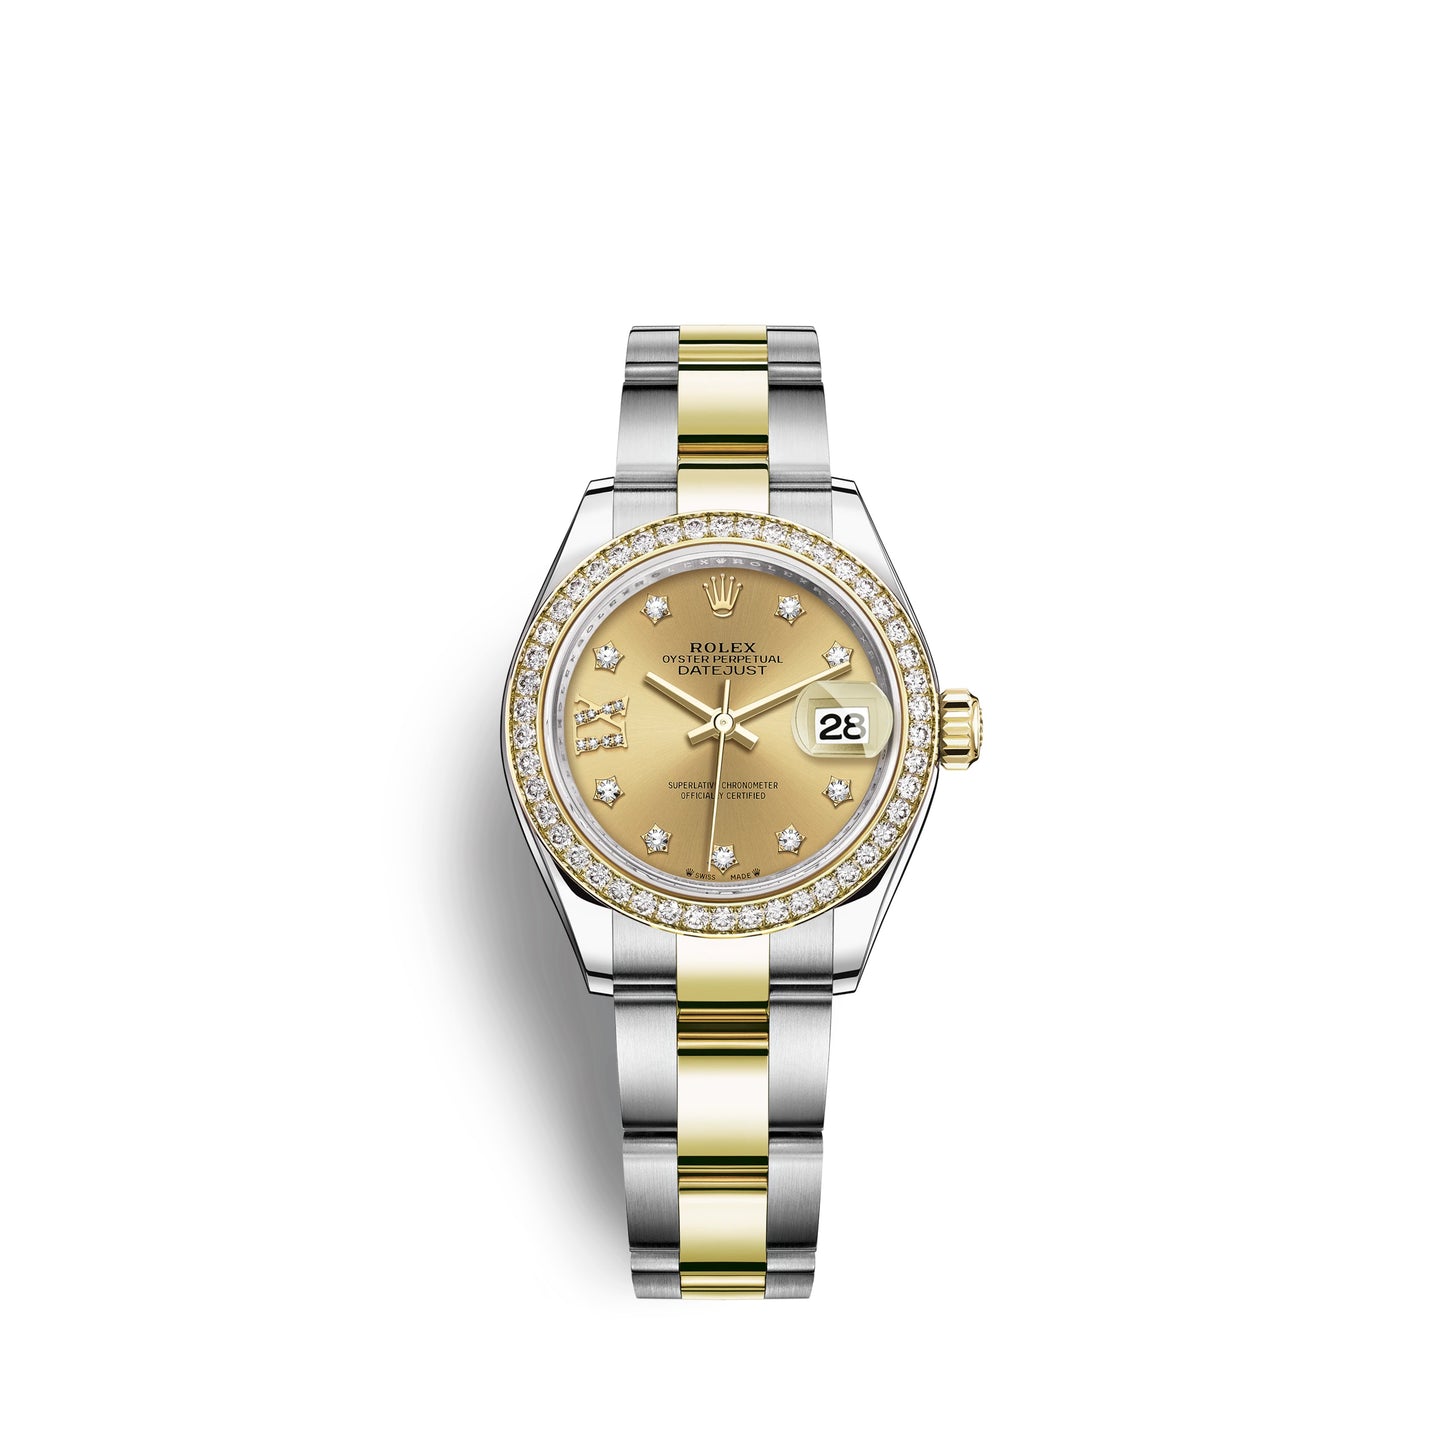 Rolex Lady-Datejust 28, Oystersteel and 18k Yellow Gold, Ref# 279383RBR-0022